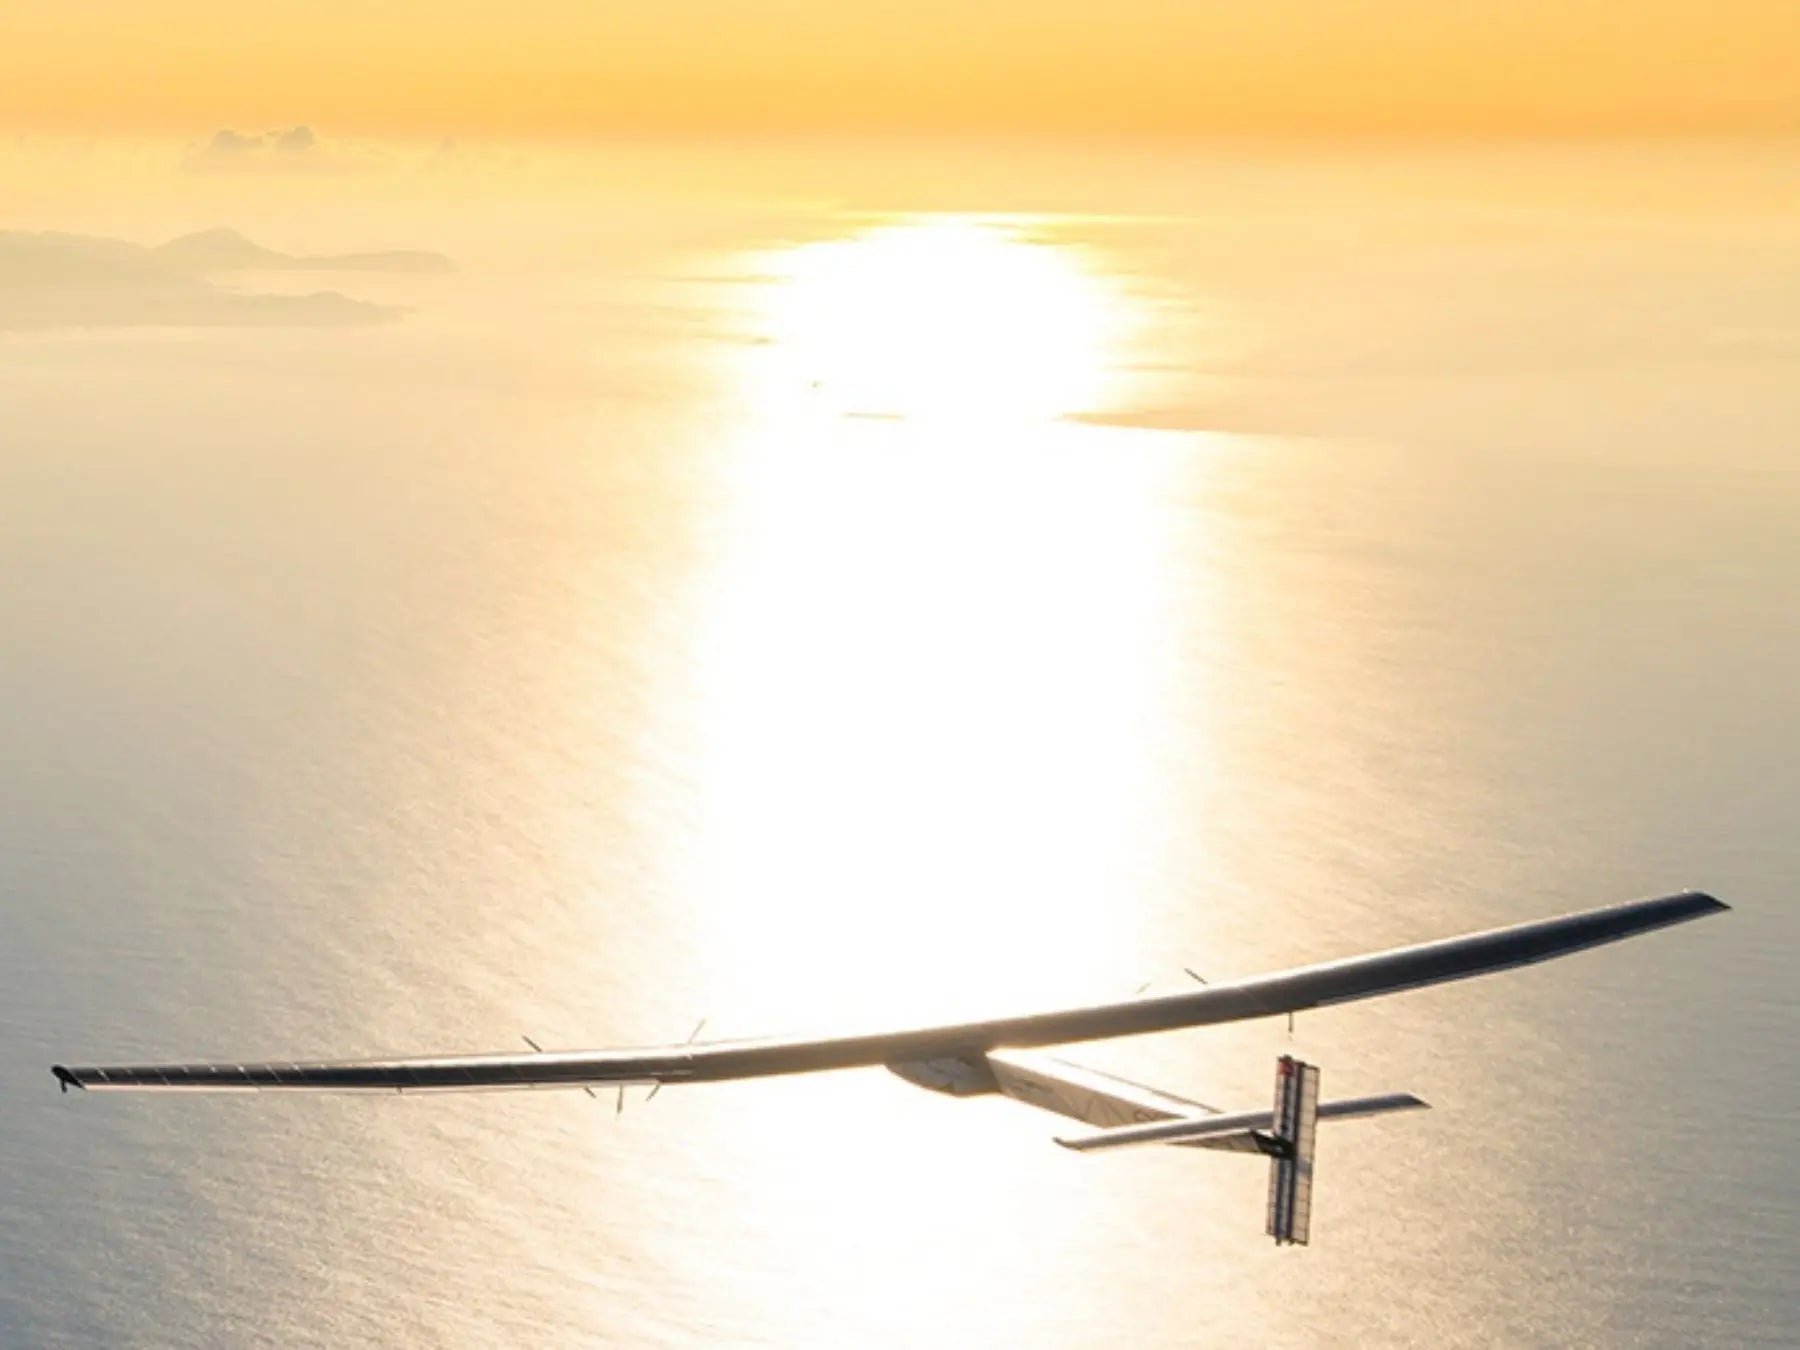 «Efficient solution by Solar Impulse», the label we are proud of